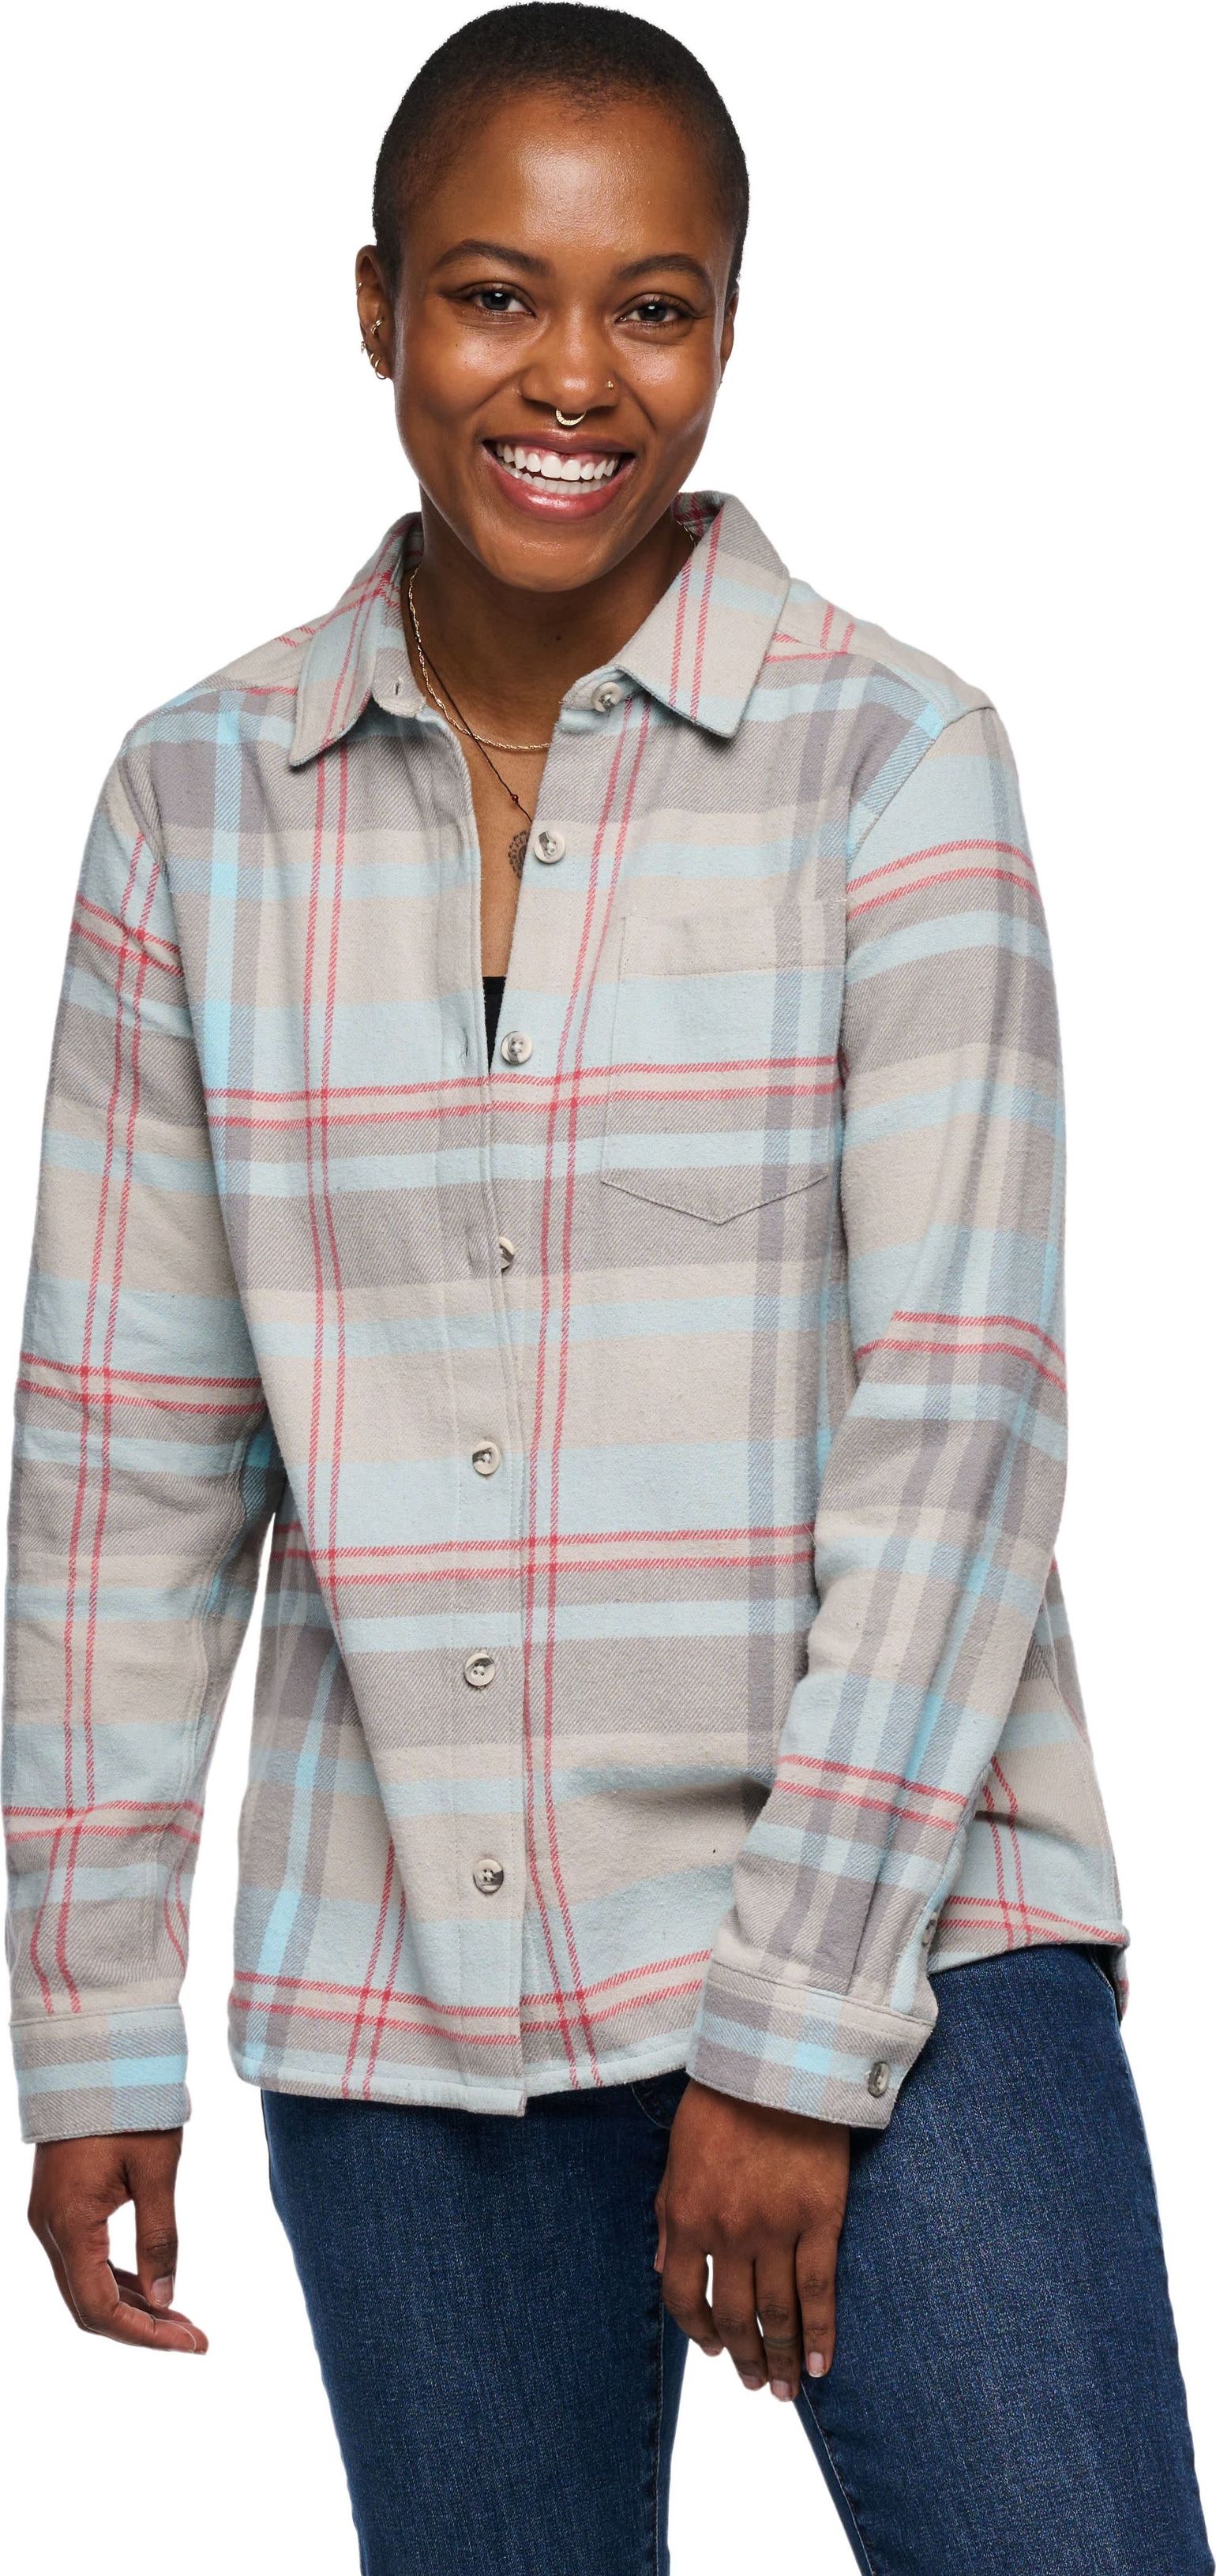 Women's Project Flannel Shirt Pewter-Belay Blue Plaid